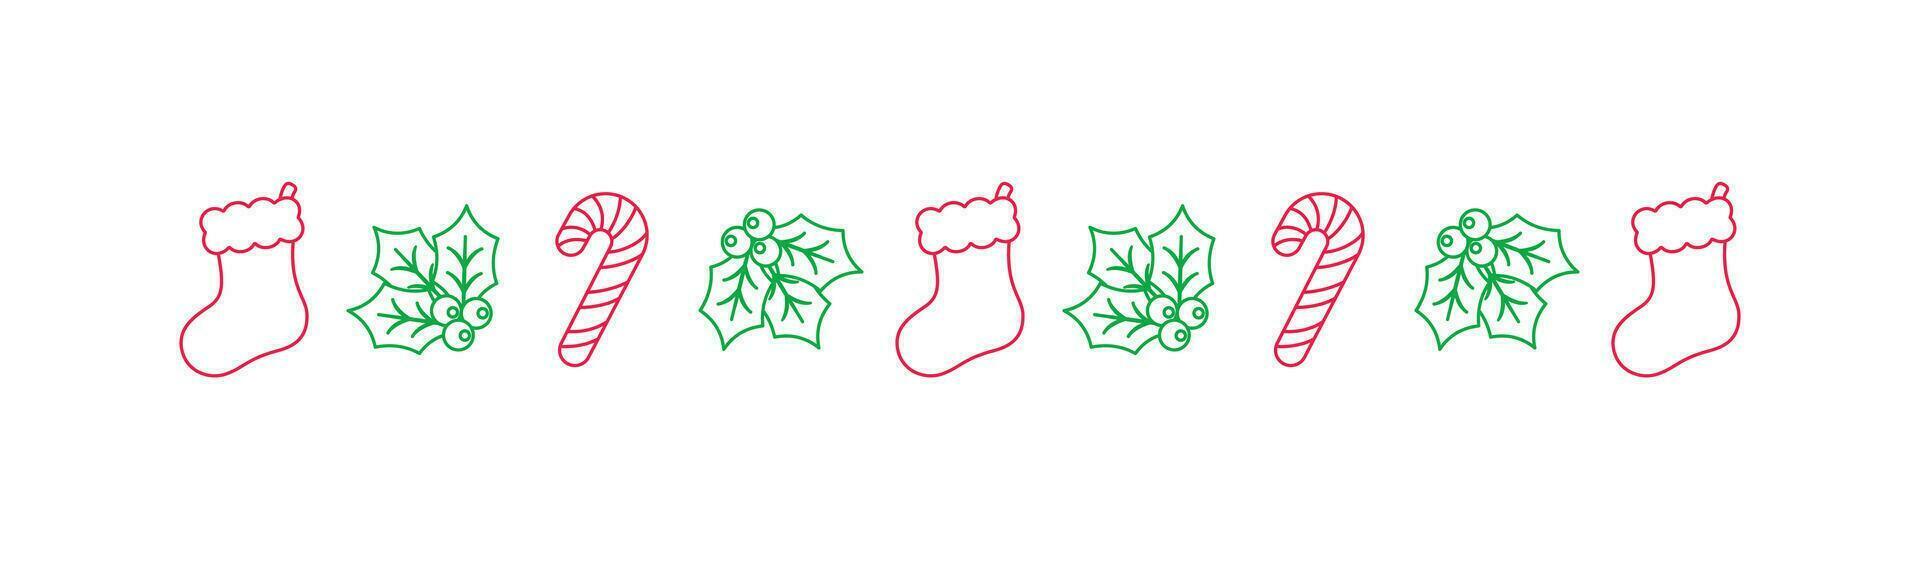 Christmas themed decorative border and text divider, Christmas Stocking, Candy Cane and Mistletoe Pattern Doodle. Vector Illustration.